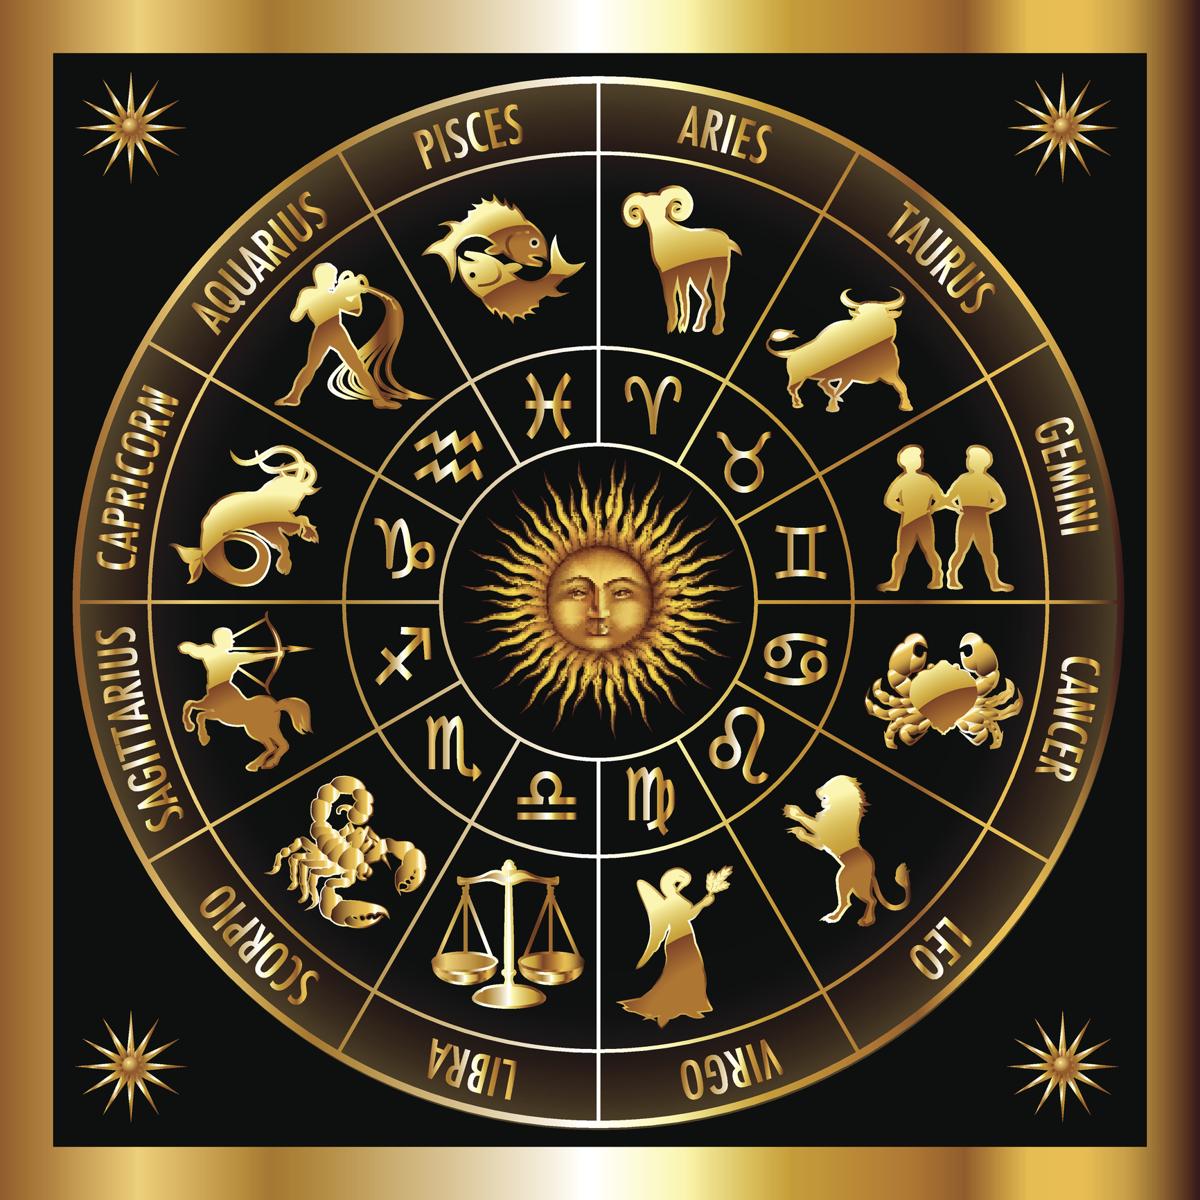  Zodiac  Sign Compatibility Find Your Best Compatible 